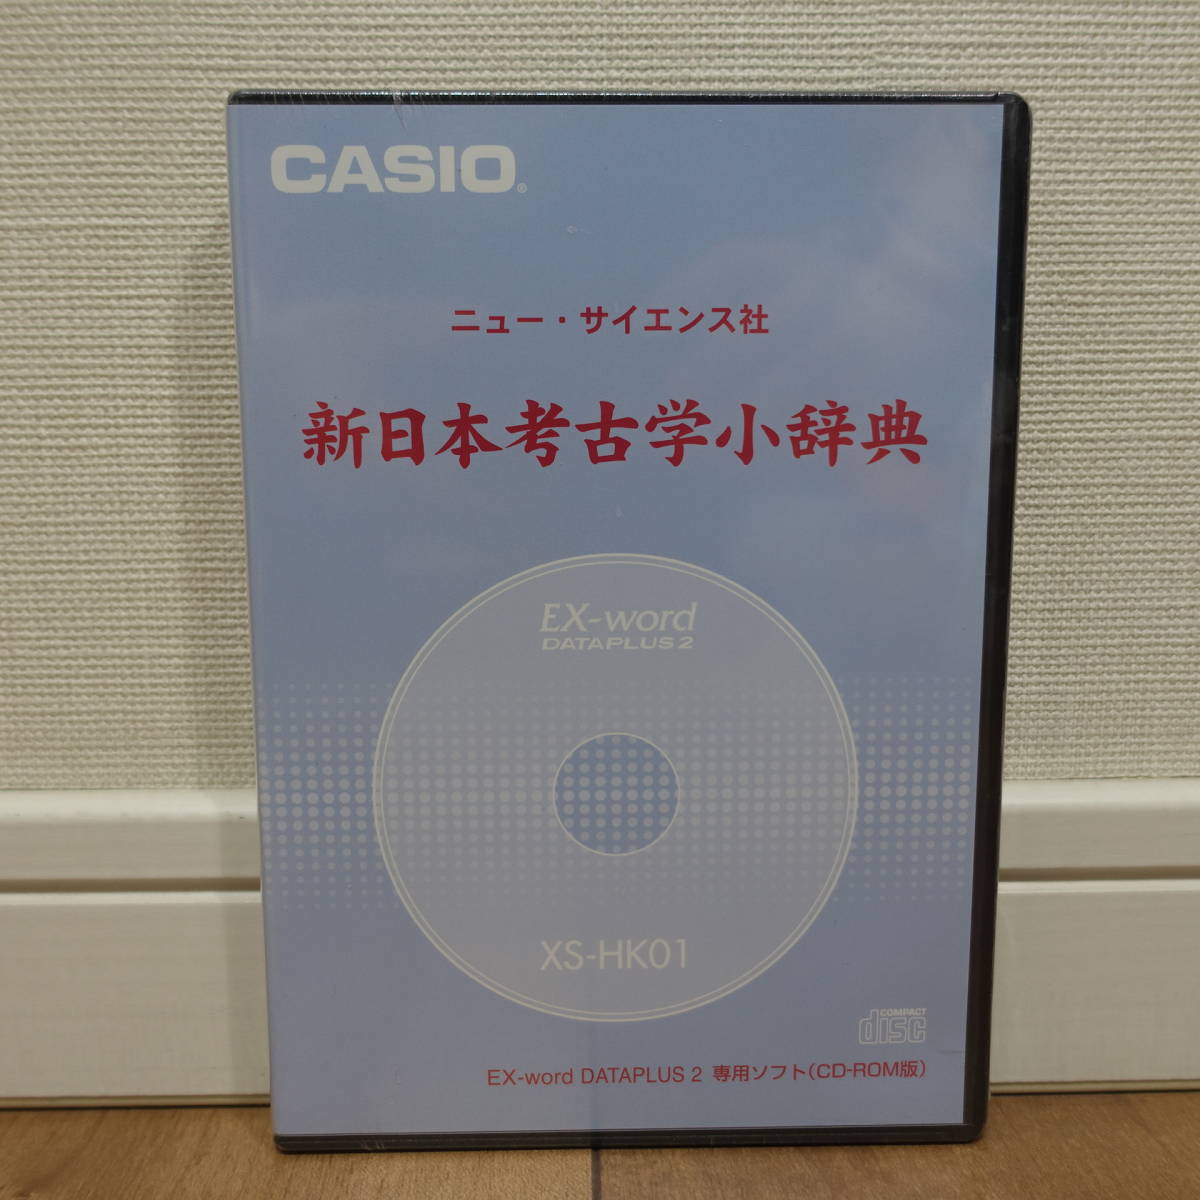 CASIO Ex-word DATAPLUS 2 exclusive use soft XS-KH01 new * science company New Japan archaeology small dictionary unopened 